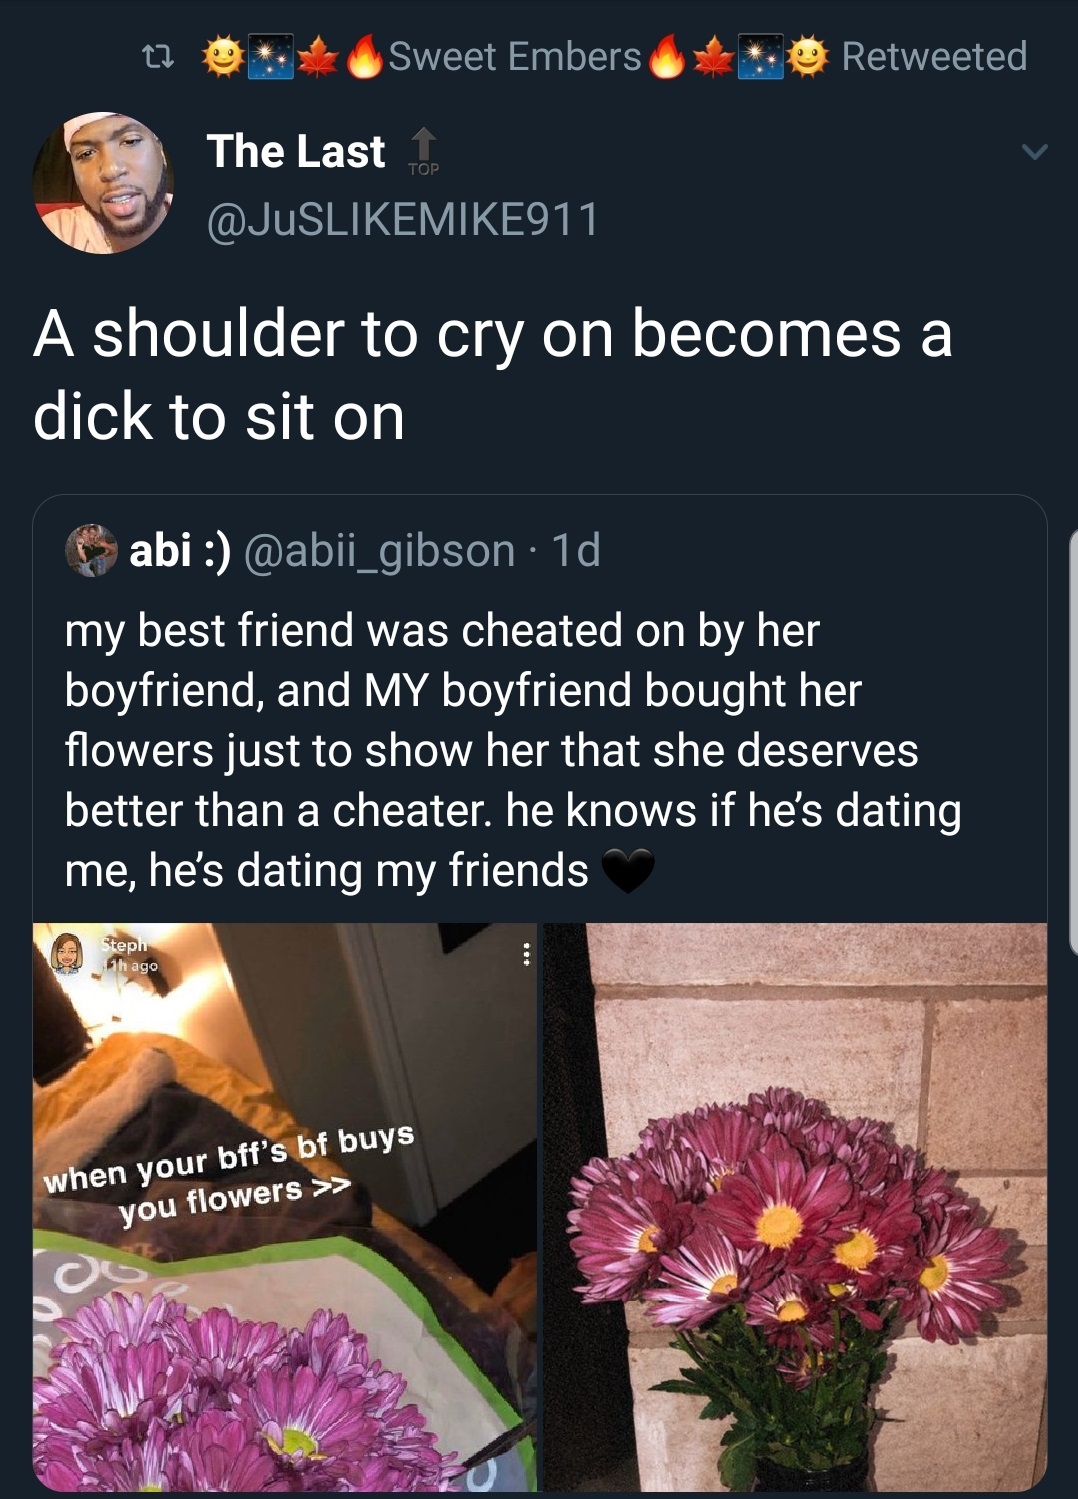 floral design - Retweeted t1 @ Sweet Embers The Last 1 A shoulder to cry on becomes a dick to sit on abi . 1d my best friend was cheated on by her boyfriend, and My boyfriend bought her flowers just to show her that she deserves better than a cheater. he 